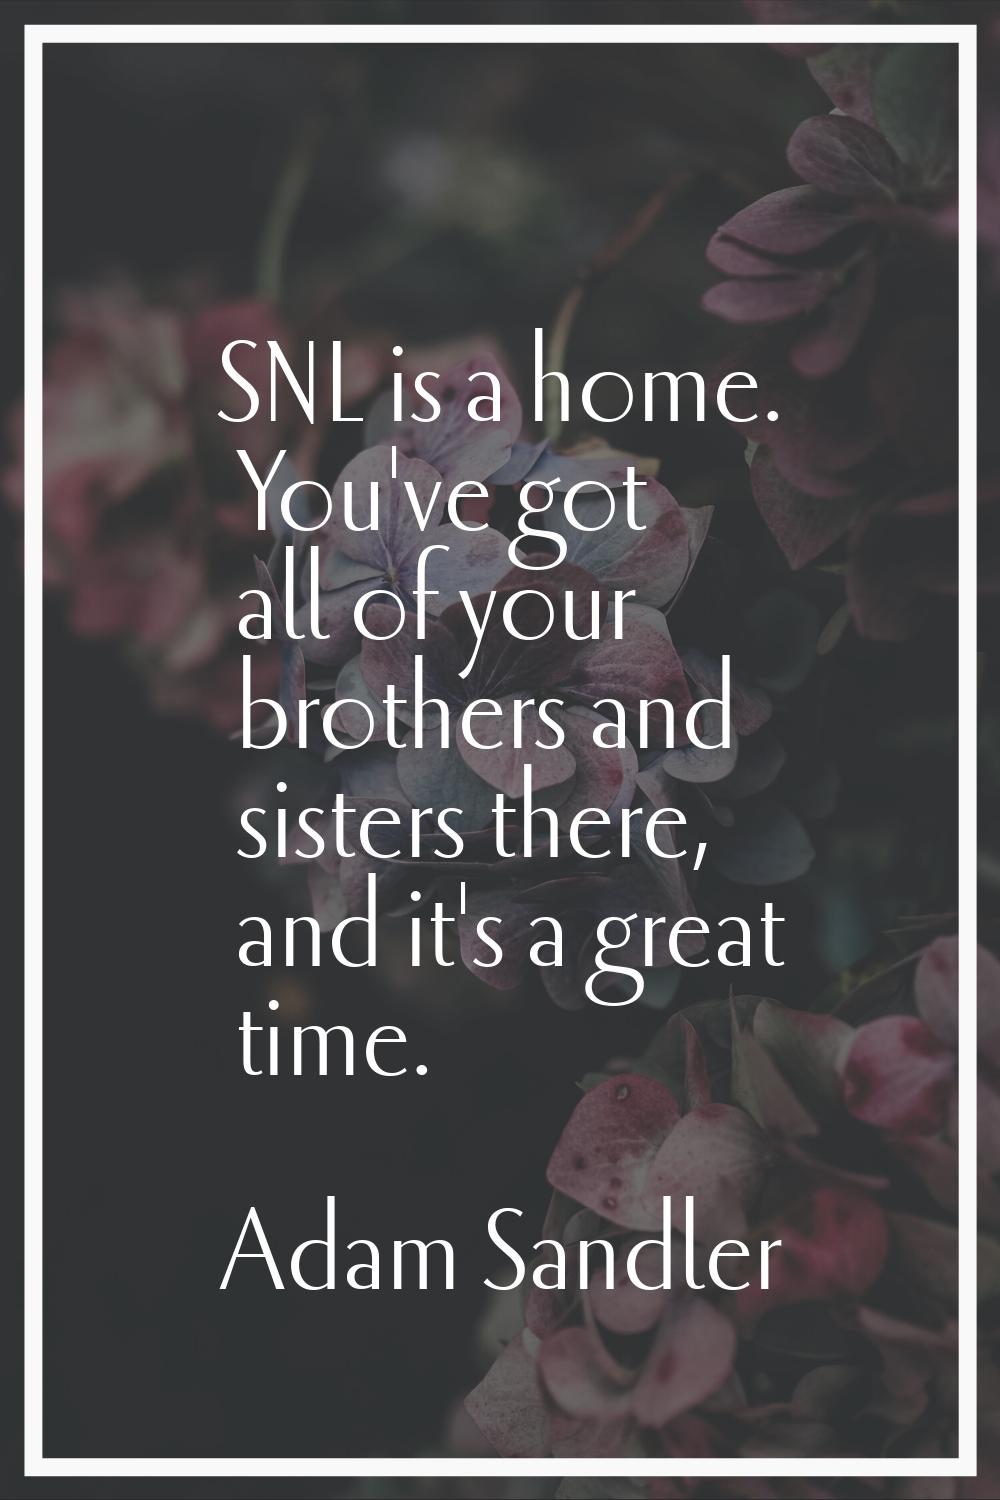 SNL is a home. You've got all of your brothers and sisters there, and it's a great time.